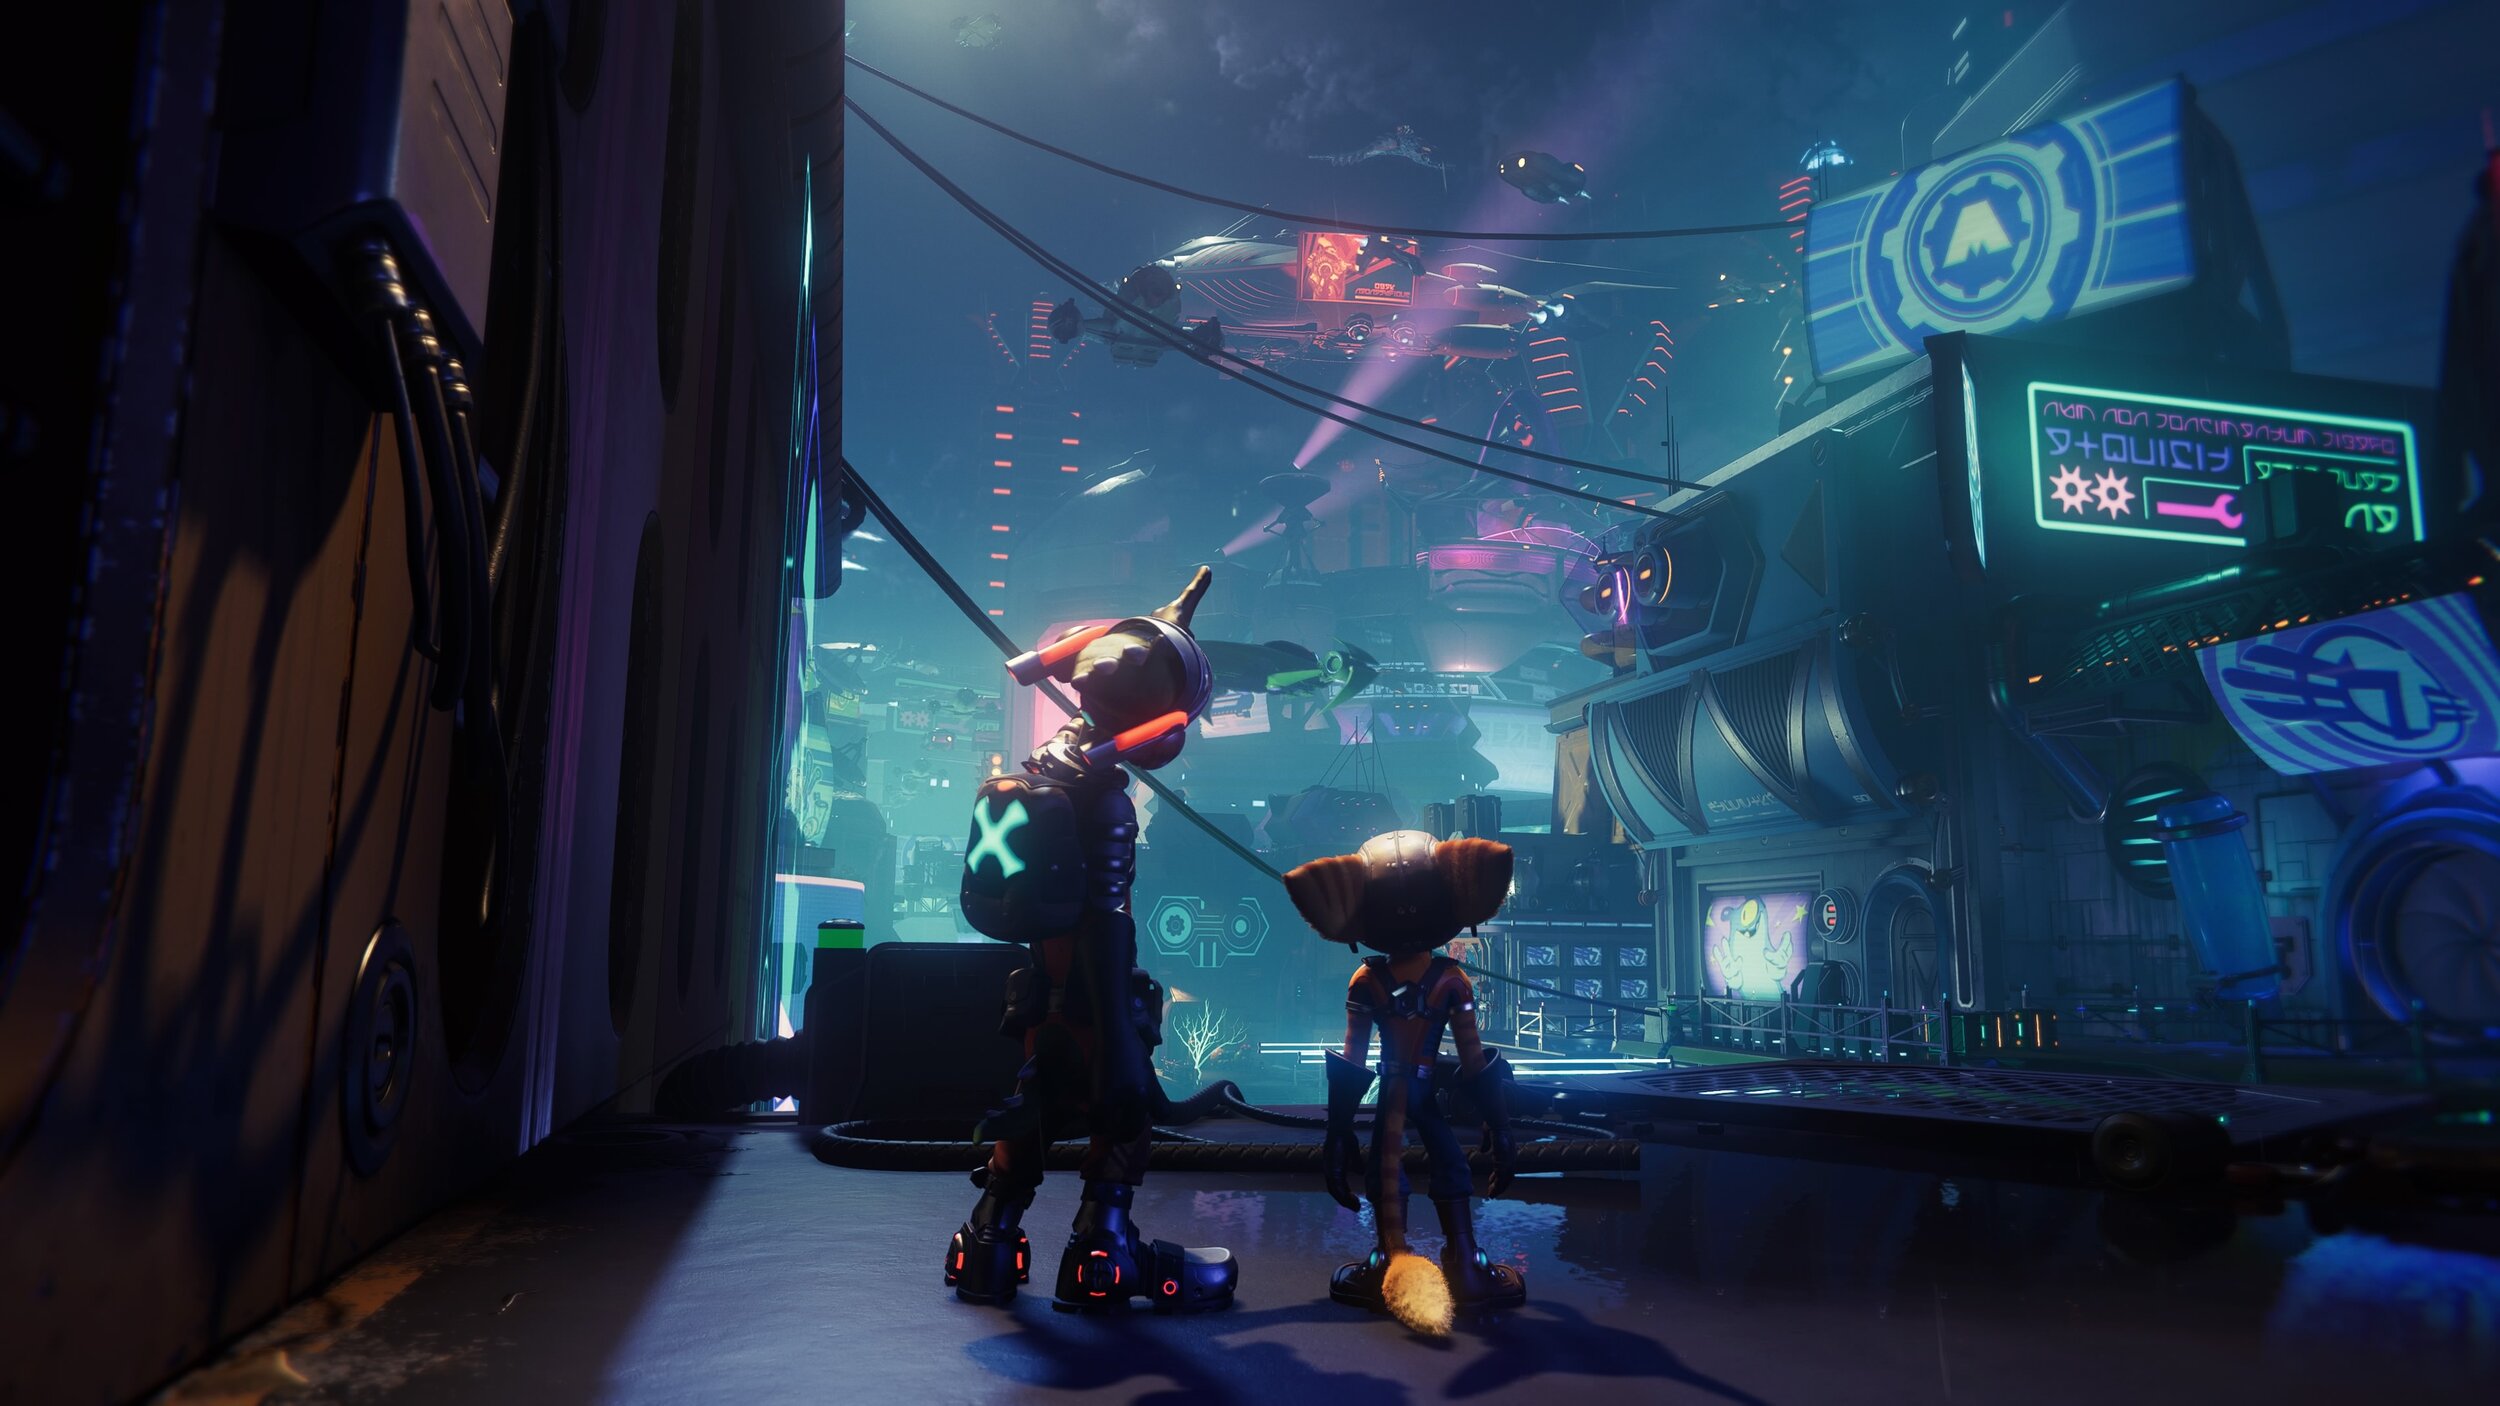 Ratchet and Clank Rift Apart PS5 Game Review - New Ratchet & Clank